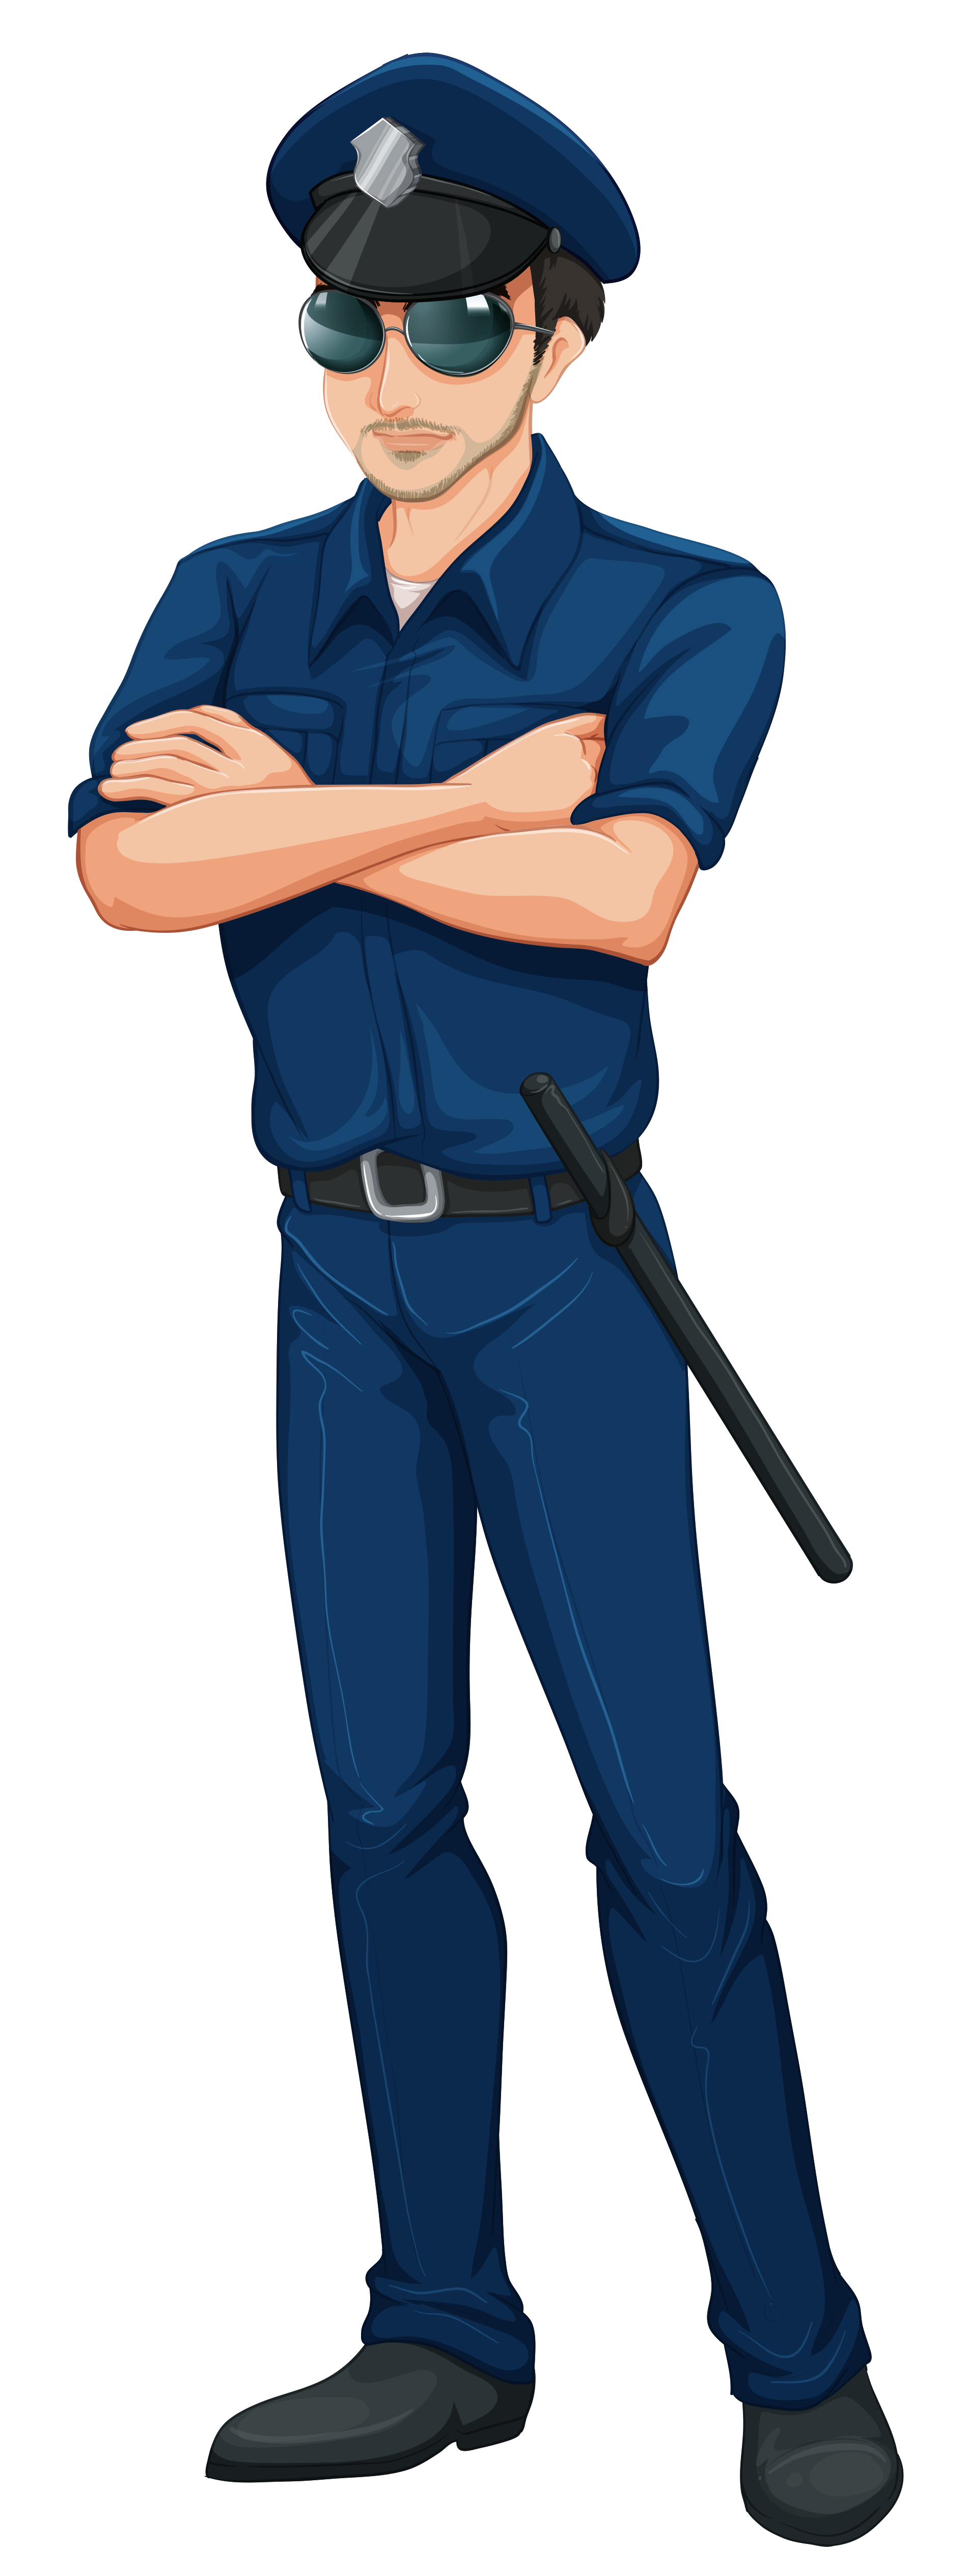 Police Hd Png Hdpng.com 1899 - Police, Transparent background PNG HD thumbnail